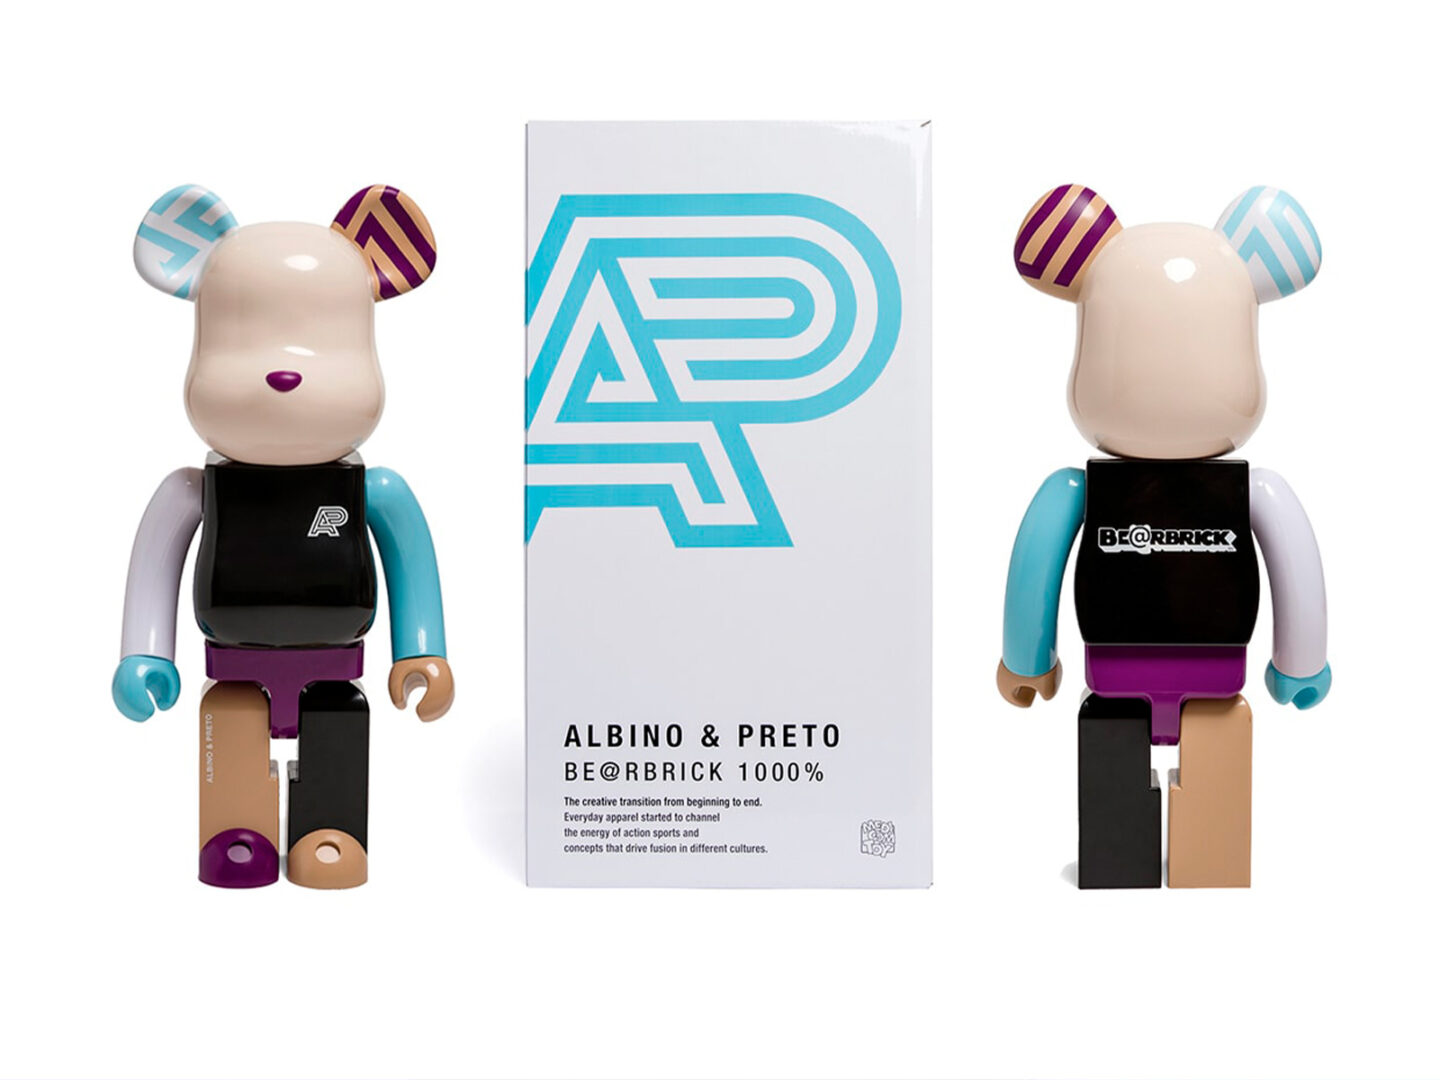 Albino & Preto and Medicom Toy reconnect to launch their BE@RBRICK 1000%